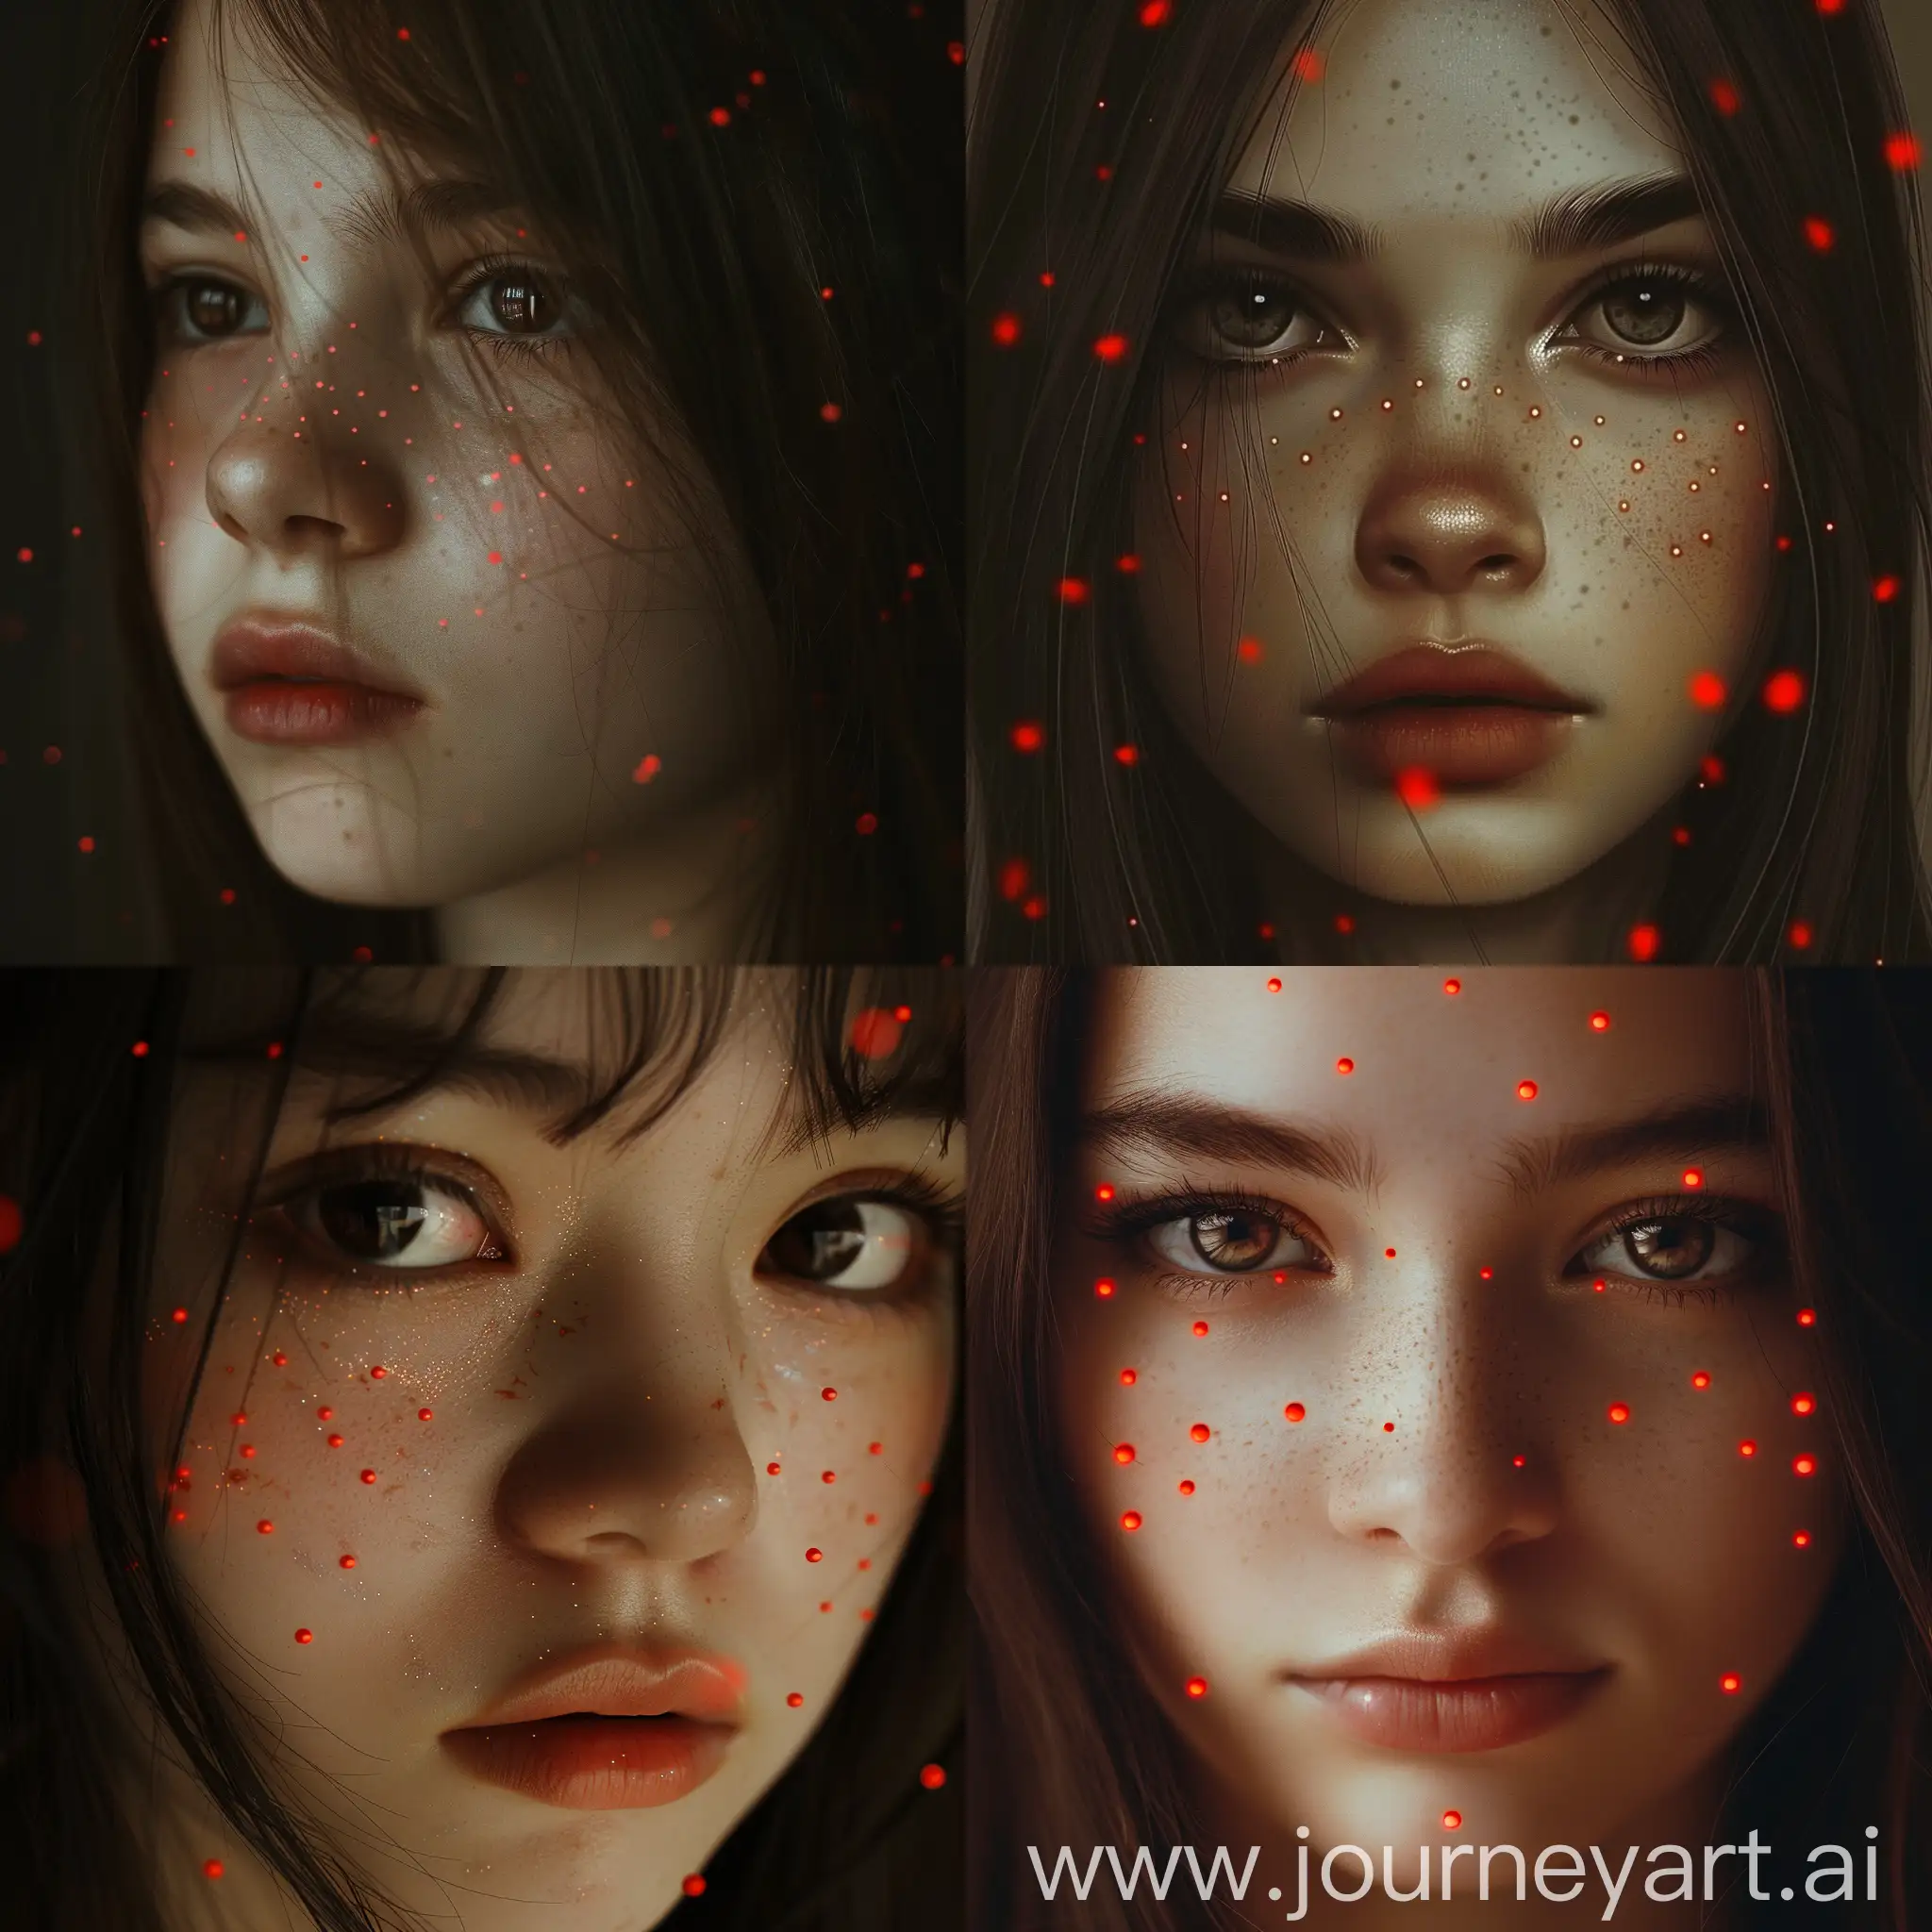 15 years old girl. Introspective, thoughtful and mysterious expression. Dark brown eyes. Dark brown straight hair. Longer lashes at the bottom. Many red dots scattered across the face.